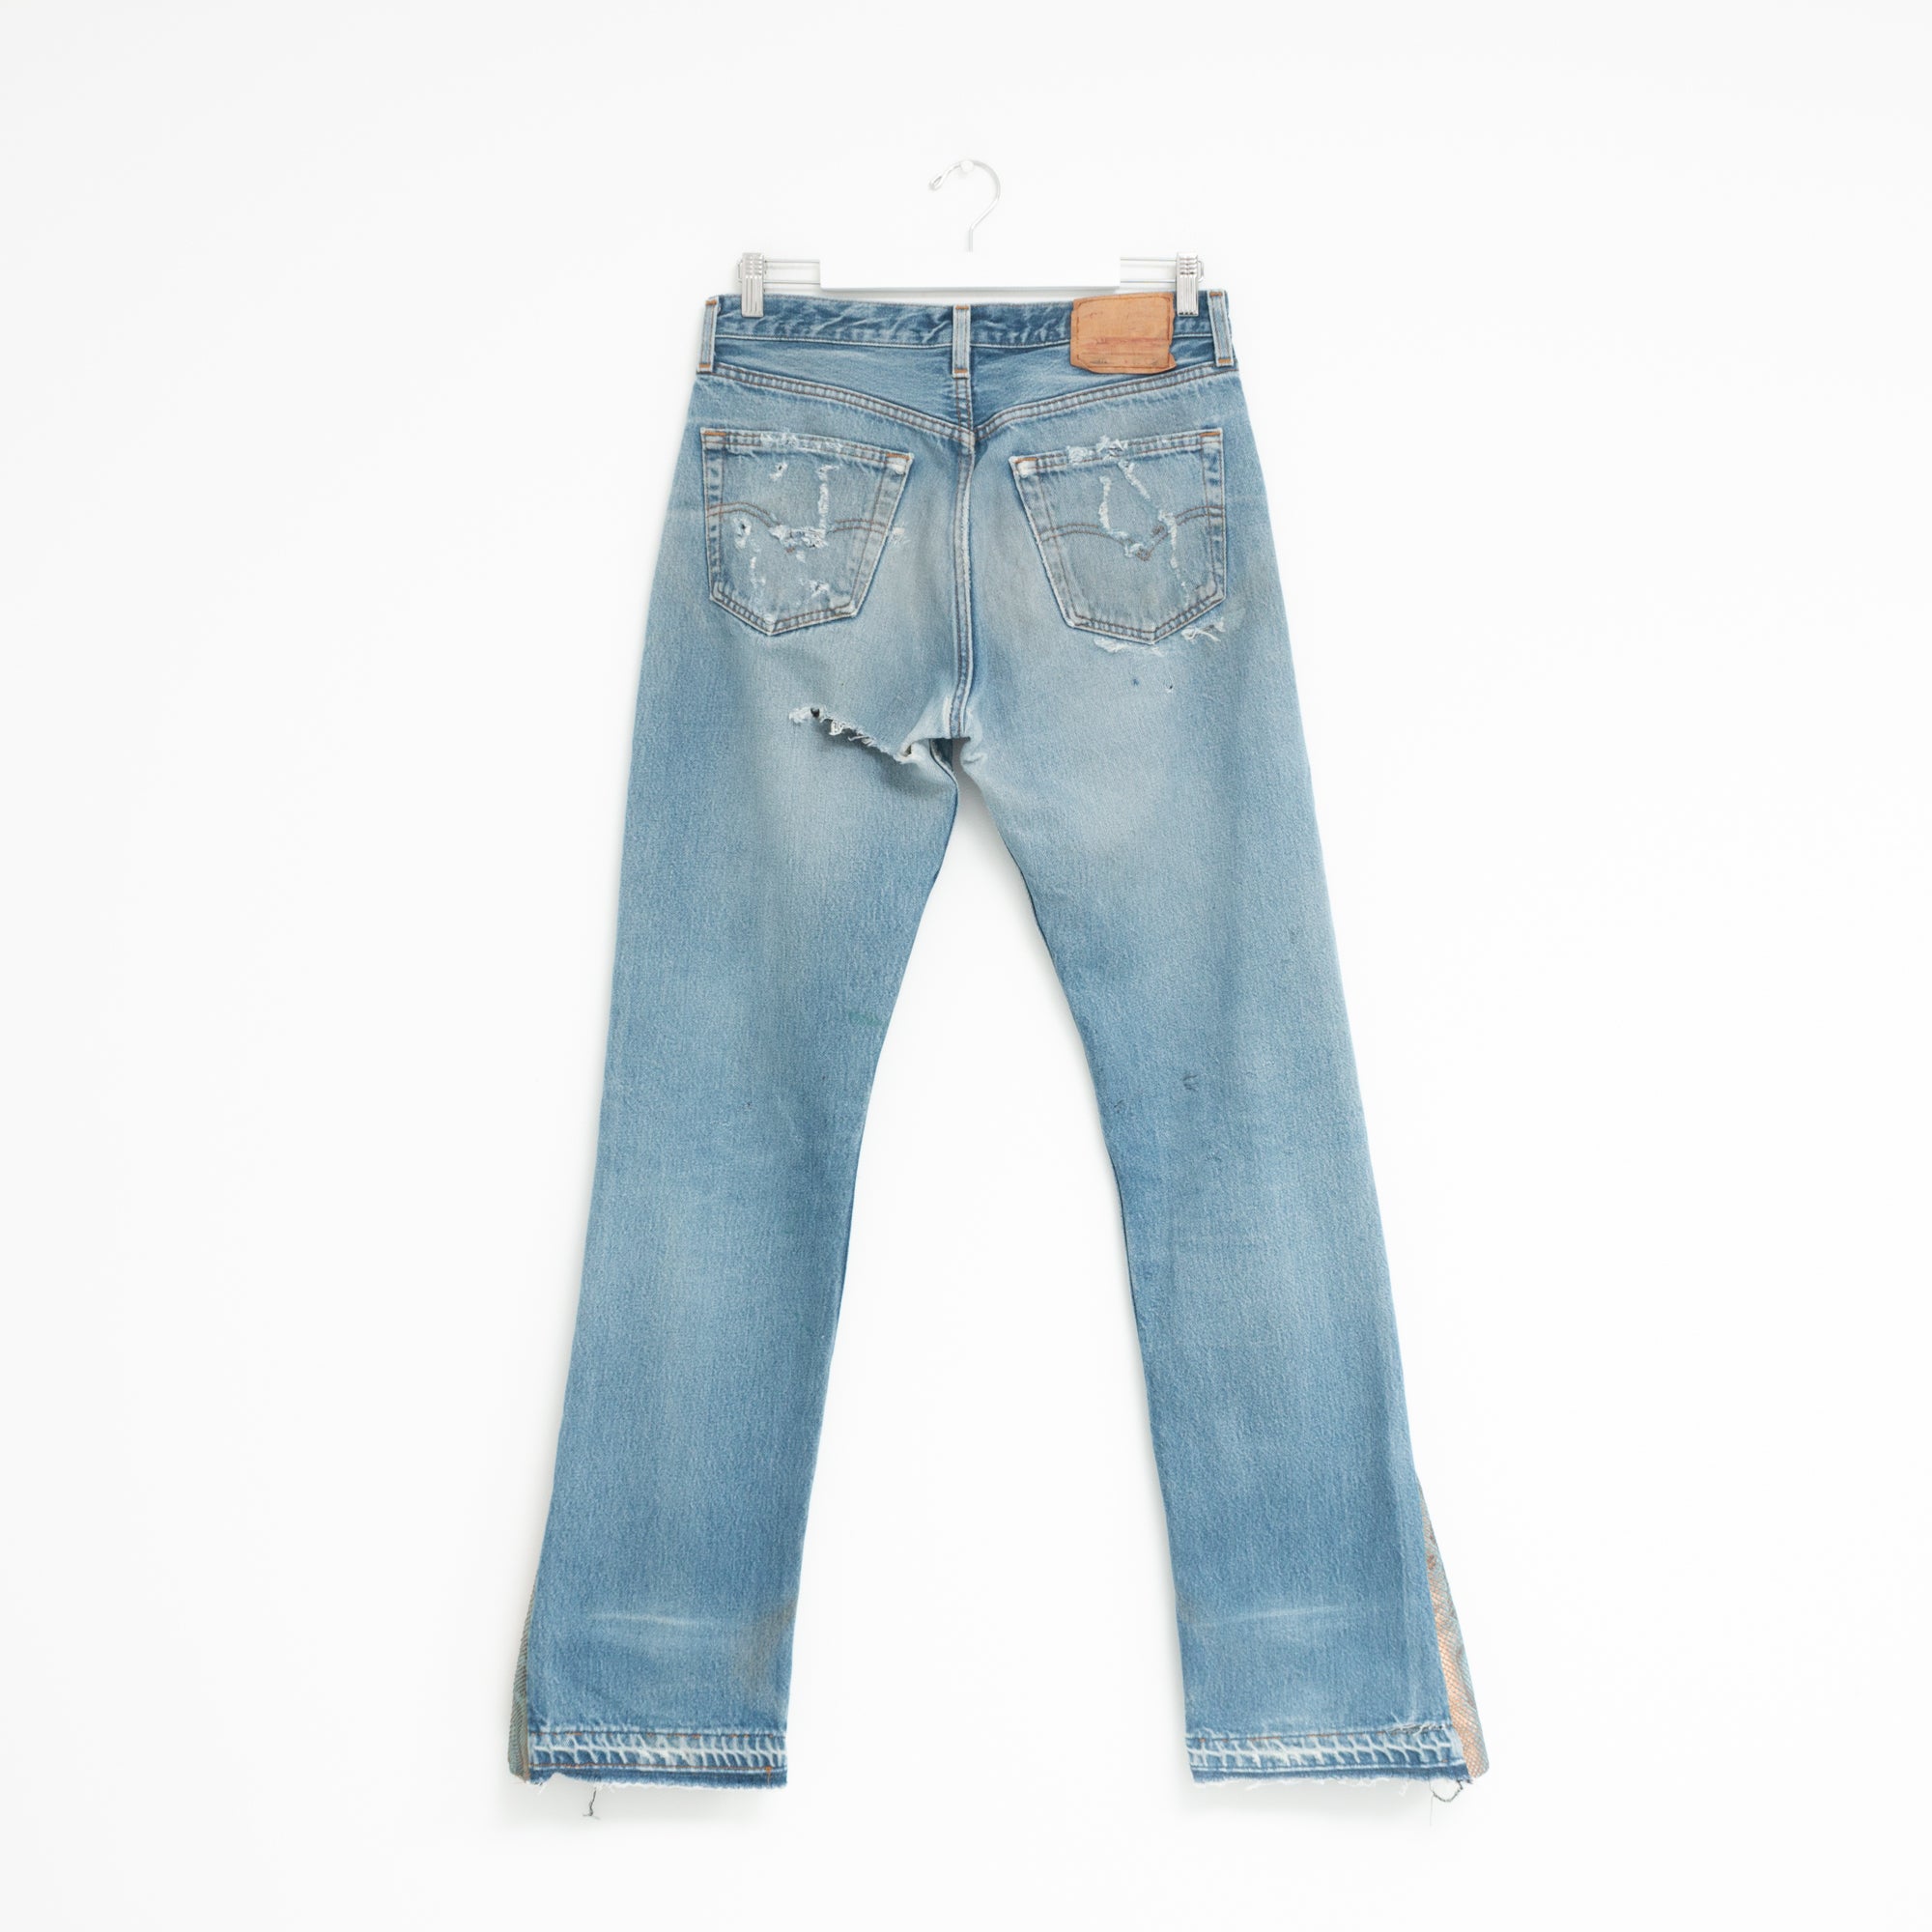 "LE FLARE" Jeans W32 L33